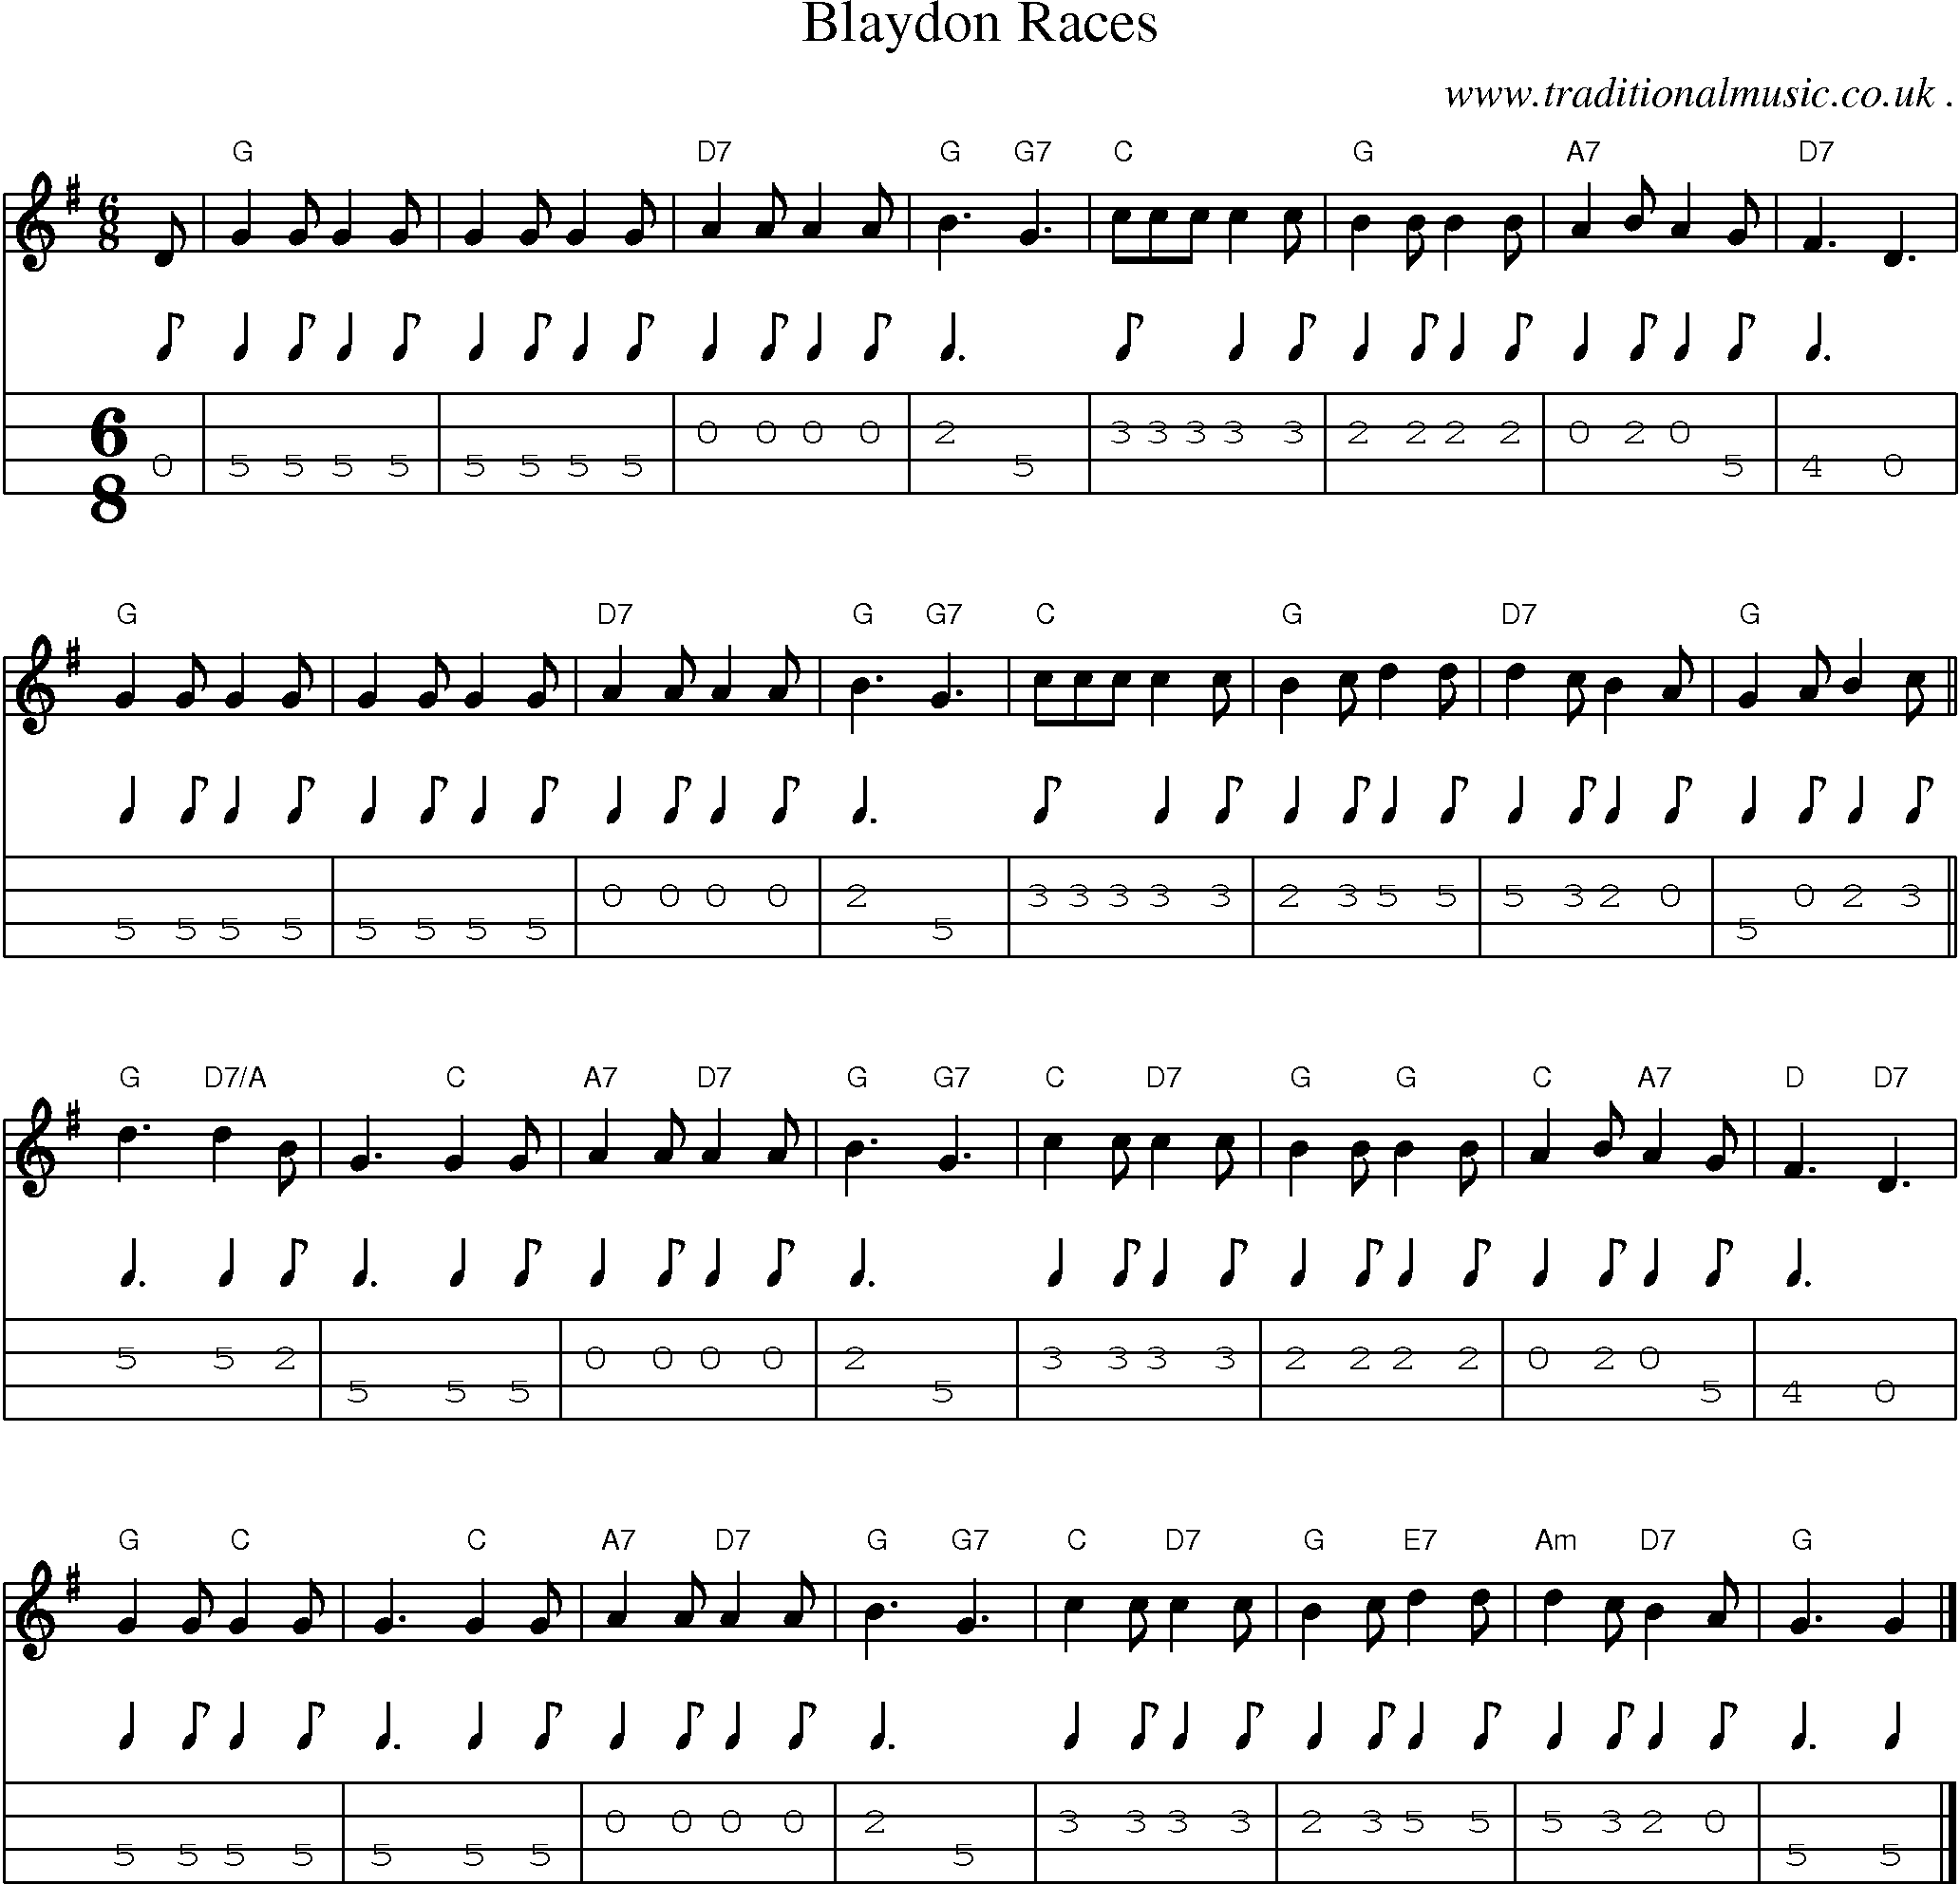 Music Score and Guitar Tabs for Blaydon Races